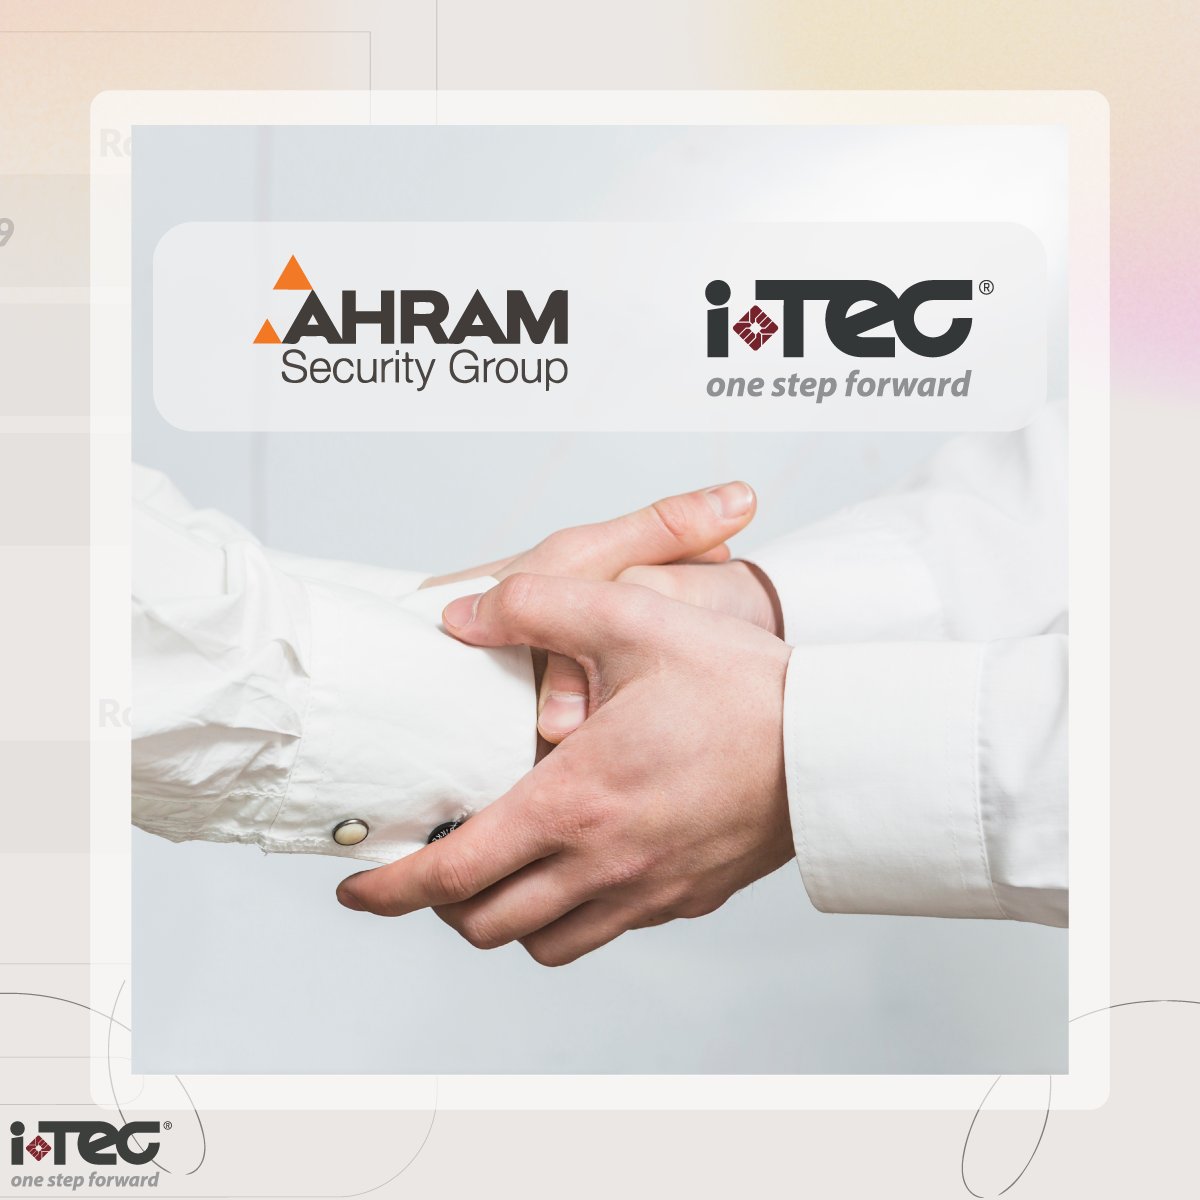 📷 𝐀𝐡𝐫𝐚𝐦 𝐒𝐞𝐜𝐮𝐫𝐢𝐭𝐲 𝐆𝐫𝐨𝐮𝐩 𝐏𝐚𝐫𝐭𝐧𝐞𝐫𝐬𝐡𝐢𝐩 📷 Together, we are dedicated to ensuring the safety for our clients.

#Partnership #AccessControl #Collaboration #TechnologyCollaboration #SecurityExperts #Egypt